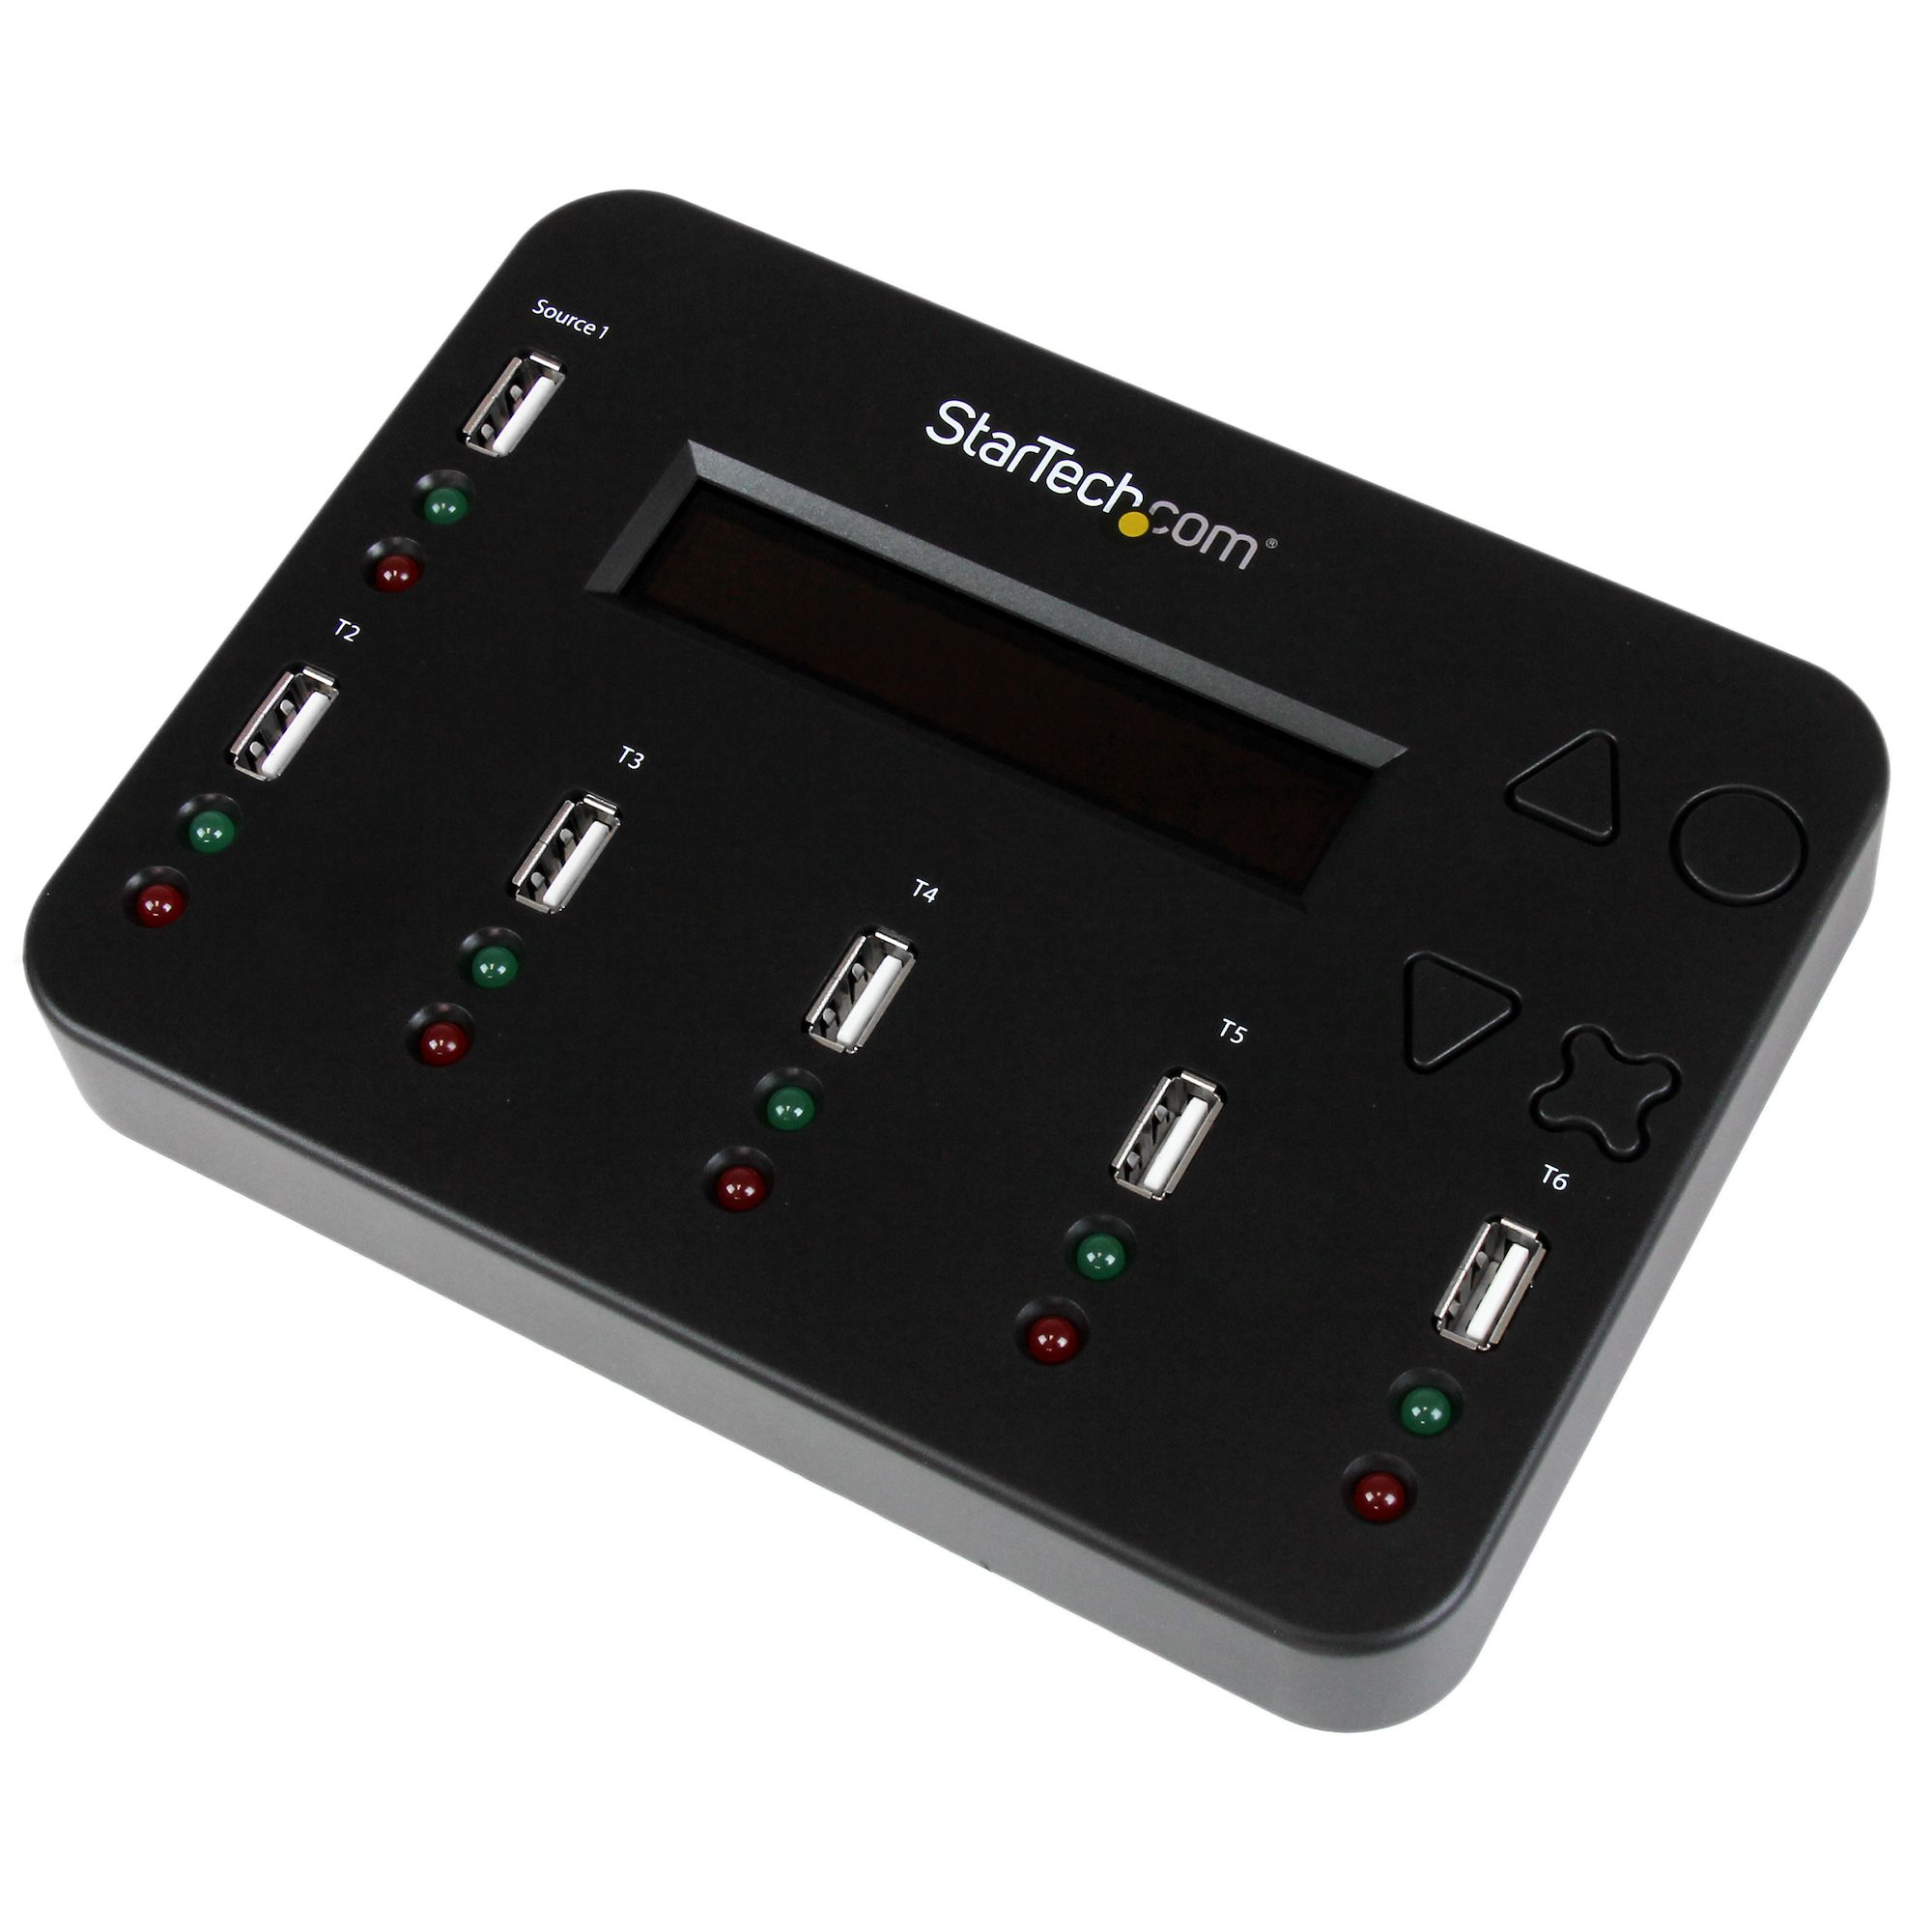 StarTech.com Standalone 1 to 5 USB Thumb Drive Duplicator and Eraser, Multiple USB Flash Drive Copier, System and File and Whole-Drive Copy at1.5 GB/min, Single and 3-Pass Erase, LCD Display